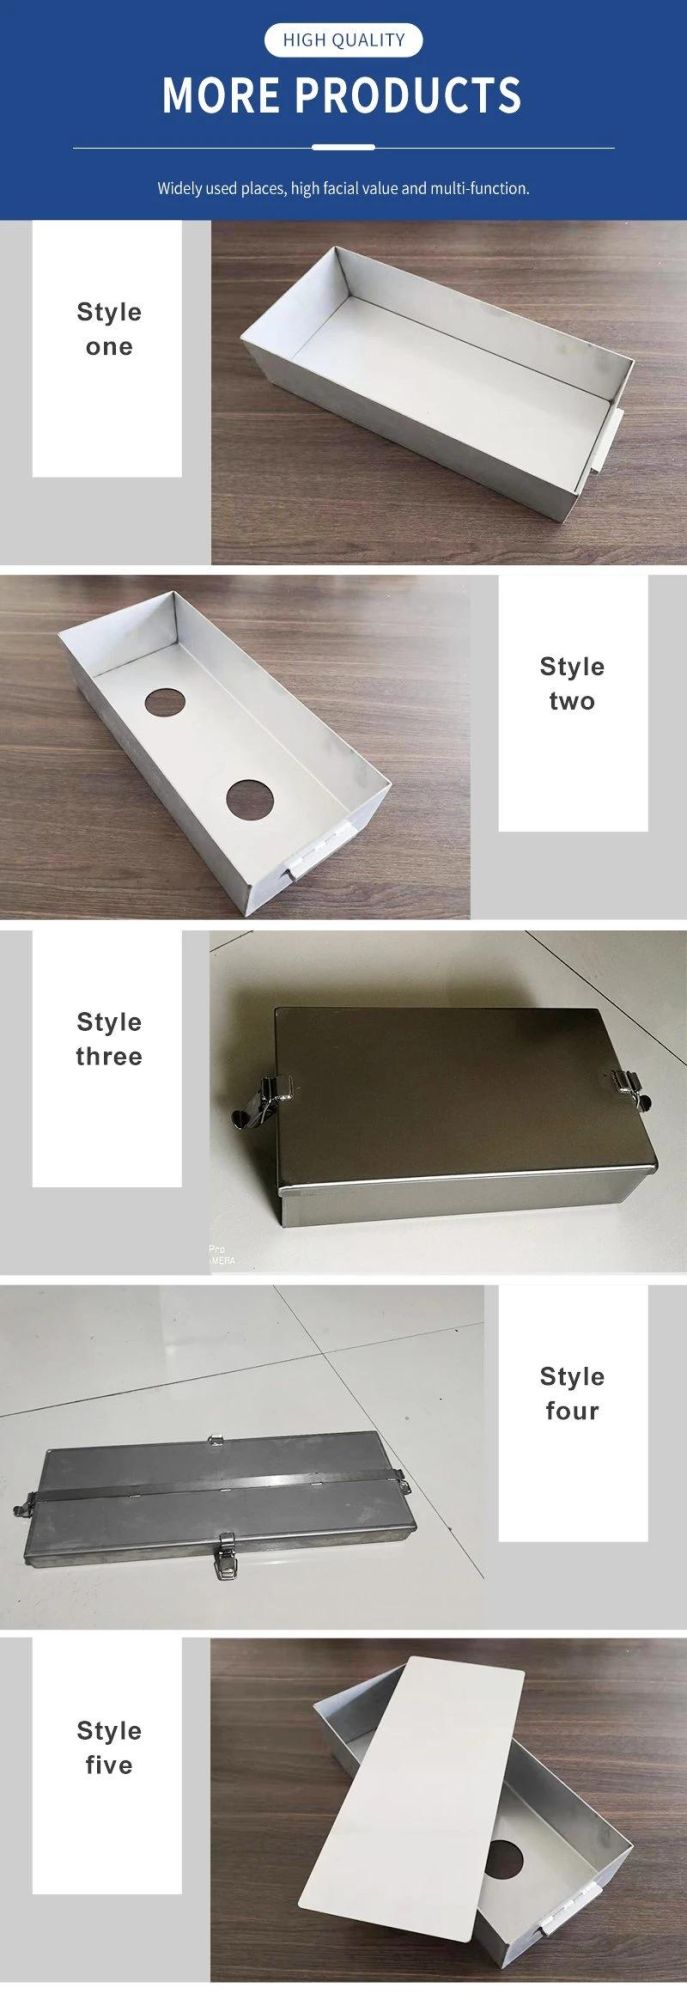 Top Quality ABS Box Mold From Top Manufacture